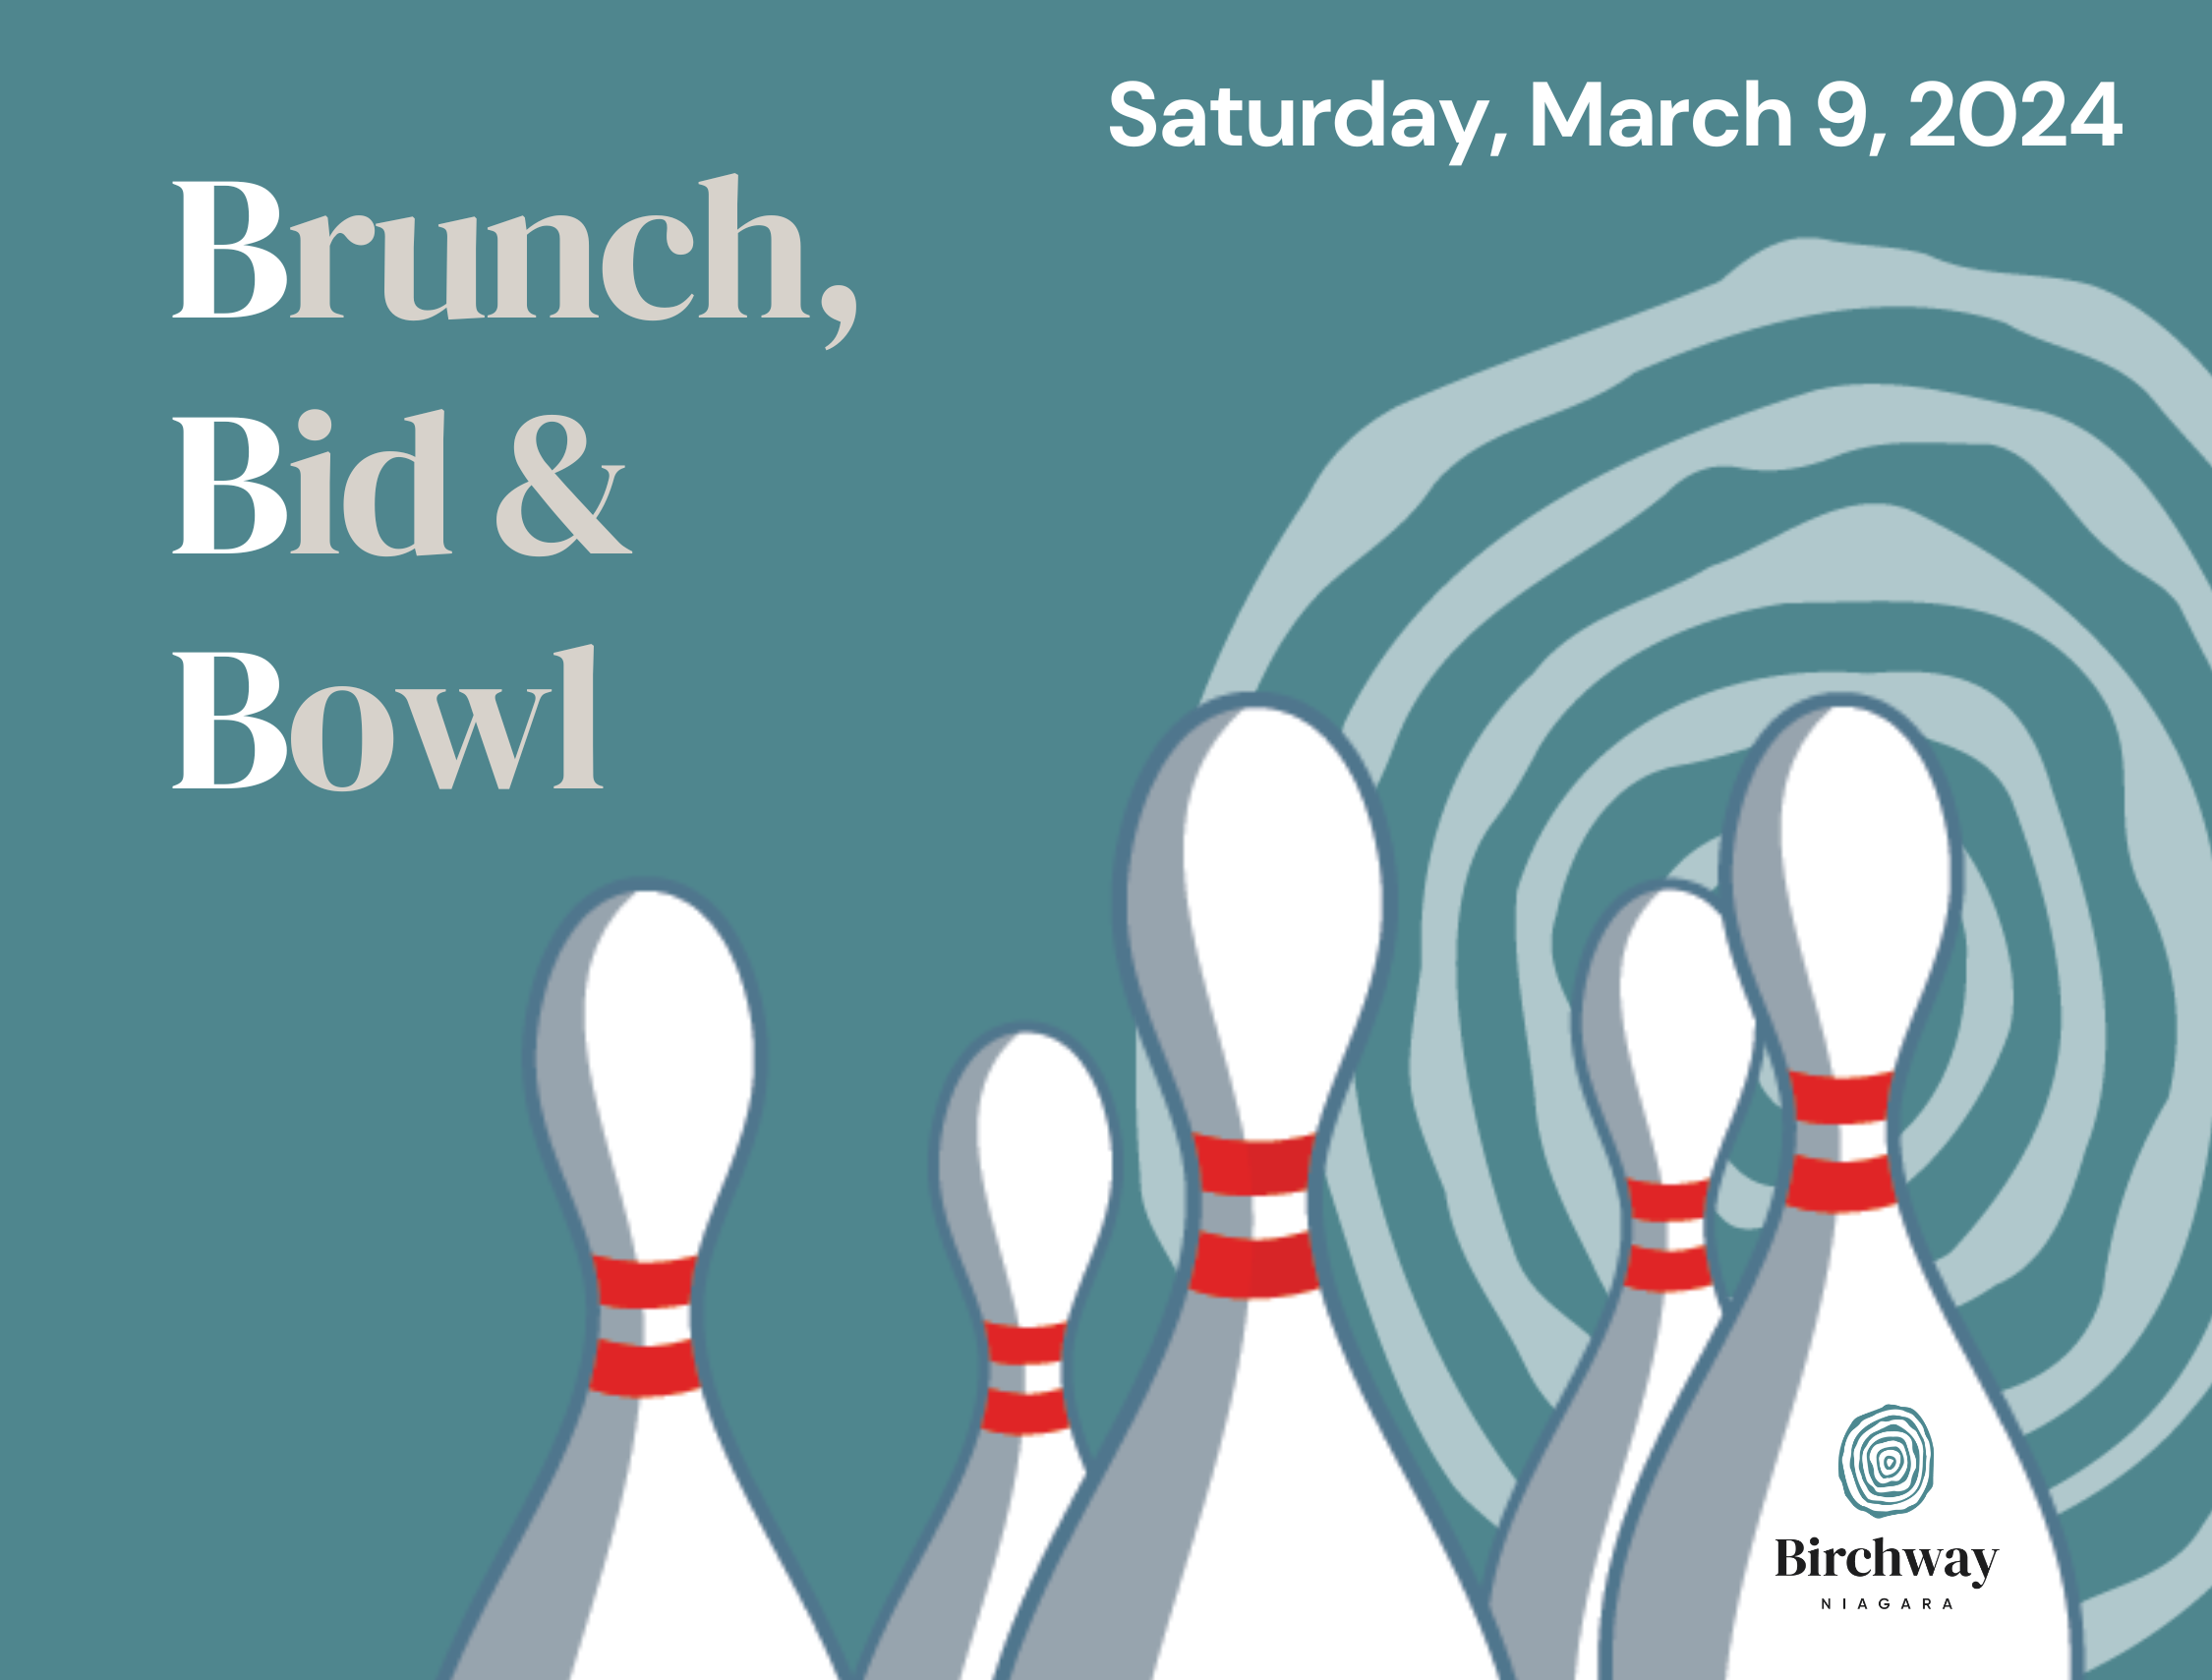 bowling pins on a green background. Text says "Brunch, Bid & Bowl, Saturday March 9, 2024.